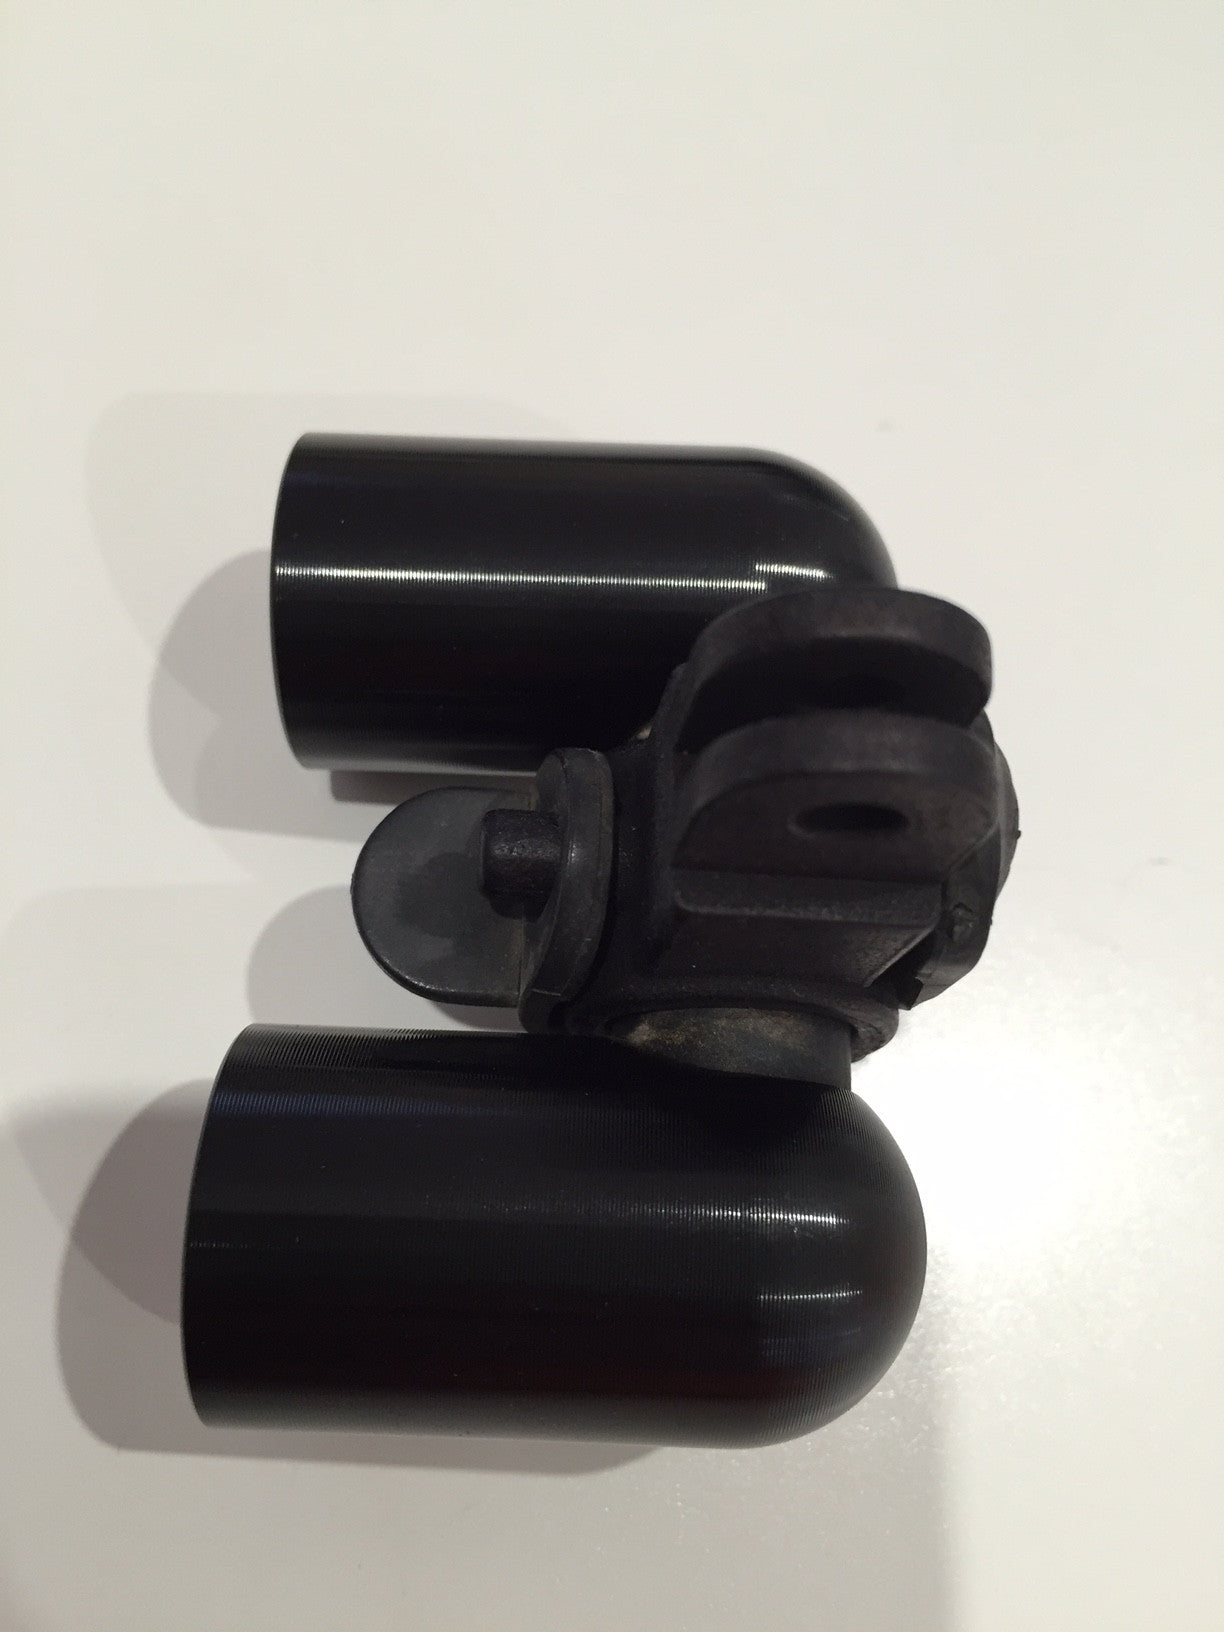 Raceware 3d Printed Ayup Gopro Mount Full Beam Extreme Cycling Lights